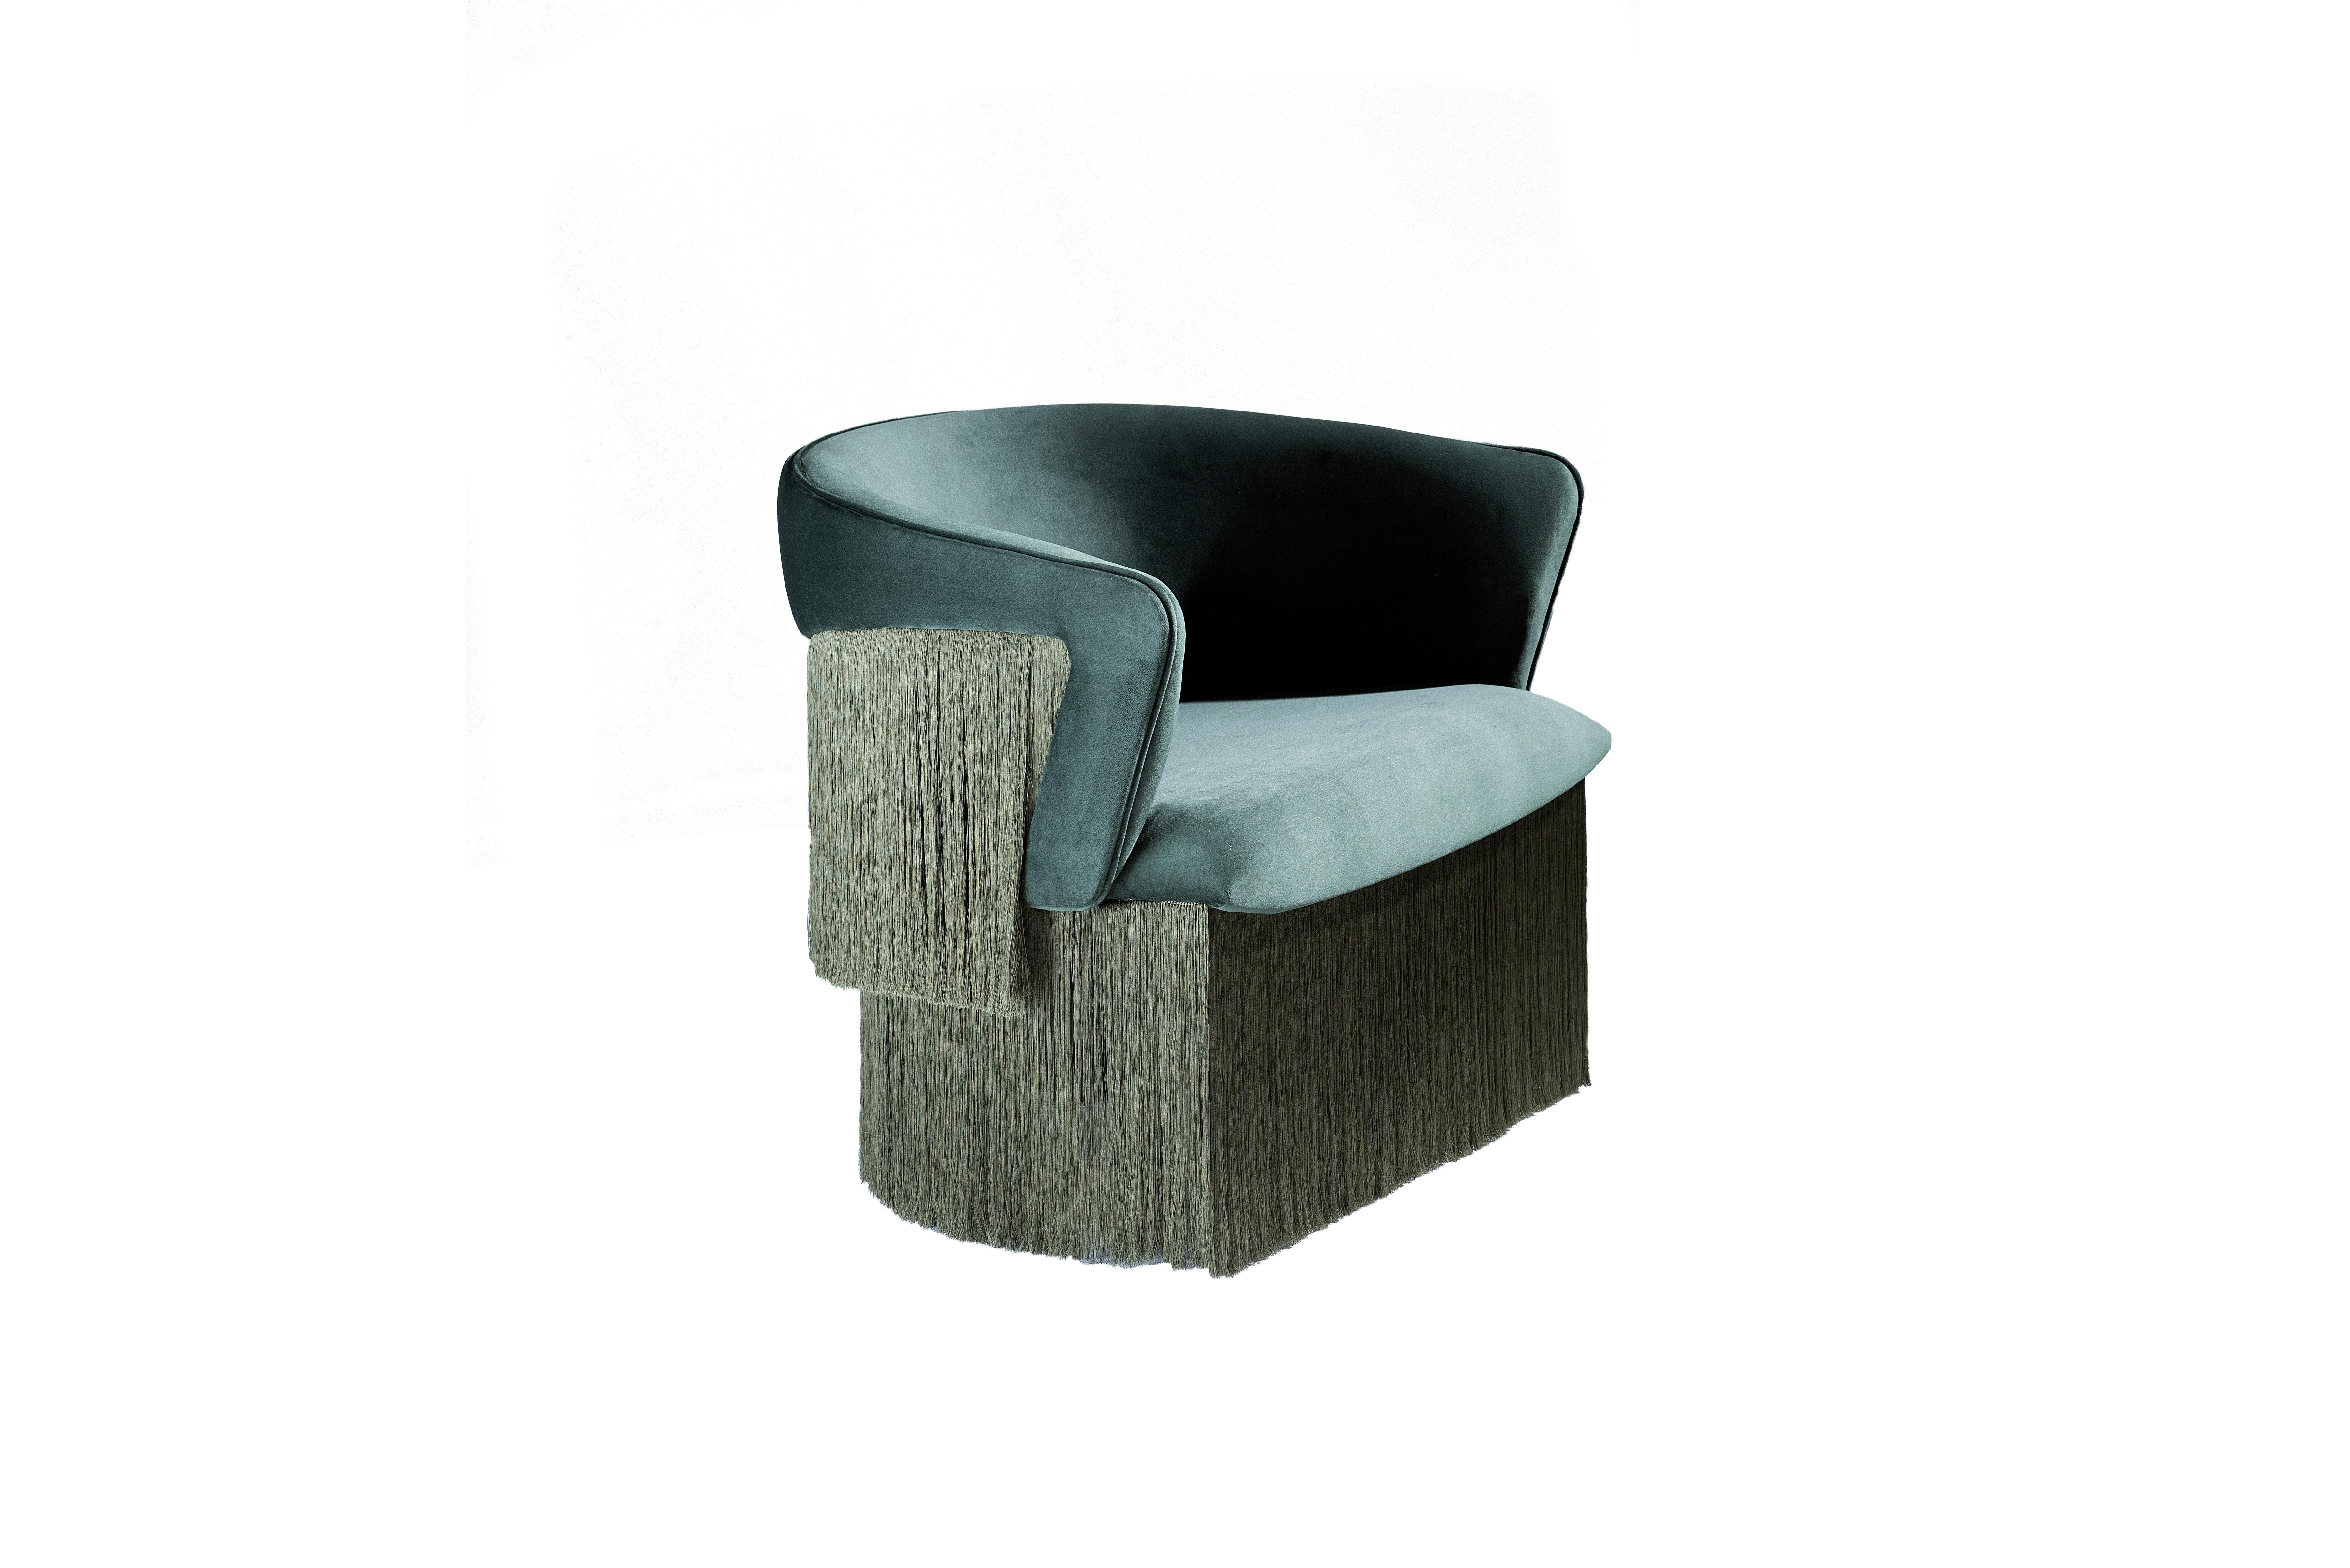 The wind swivel armchair is elegantly upholstered in velvet: Green, black, light pink, or offwithe colors options.

The breeze is identified with the lightness and freshness of the feeling of the skin, of the wind, in its constant movement. Thus